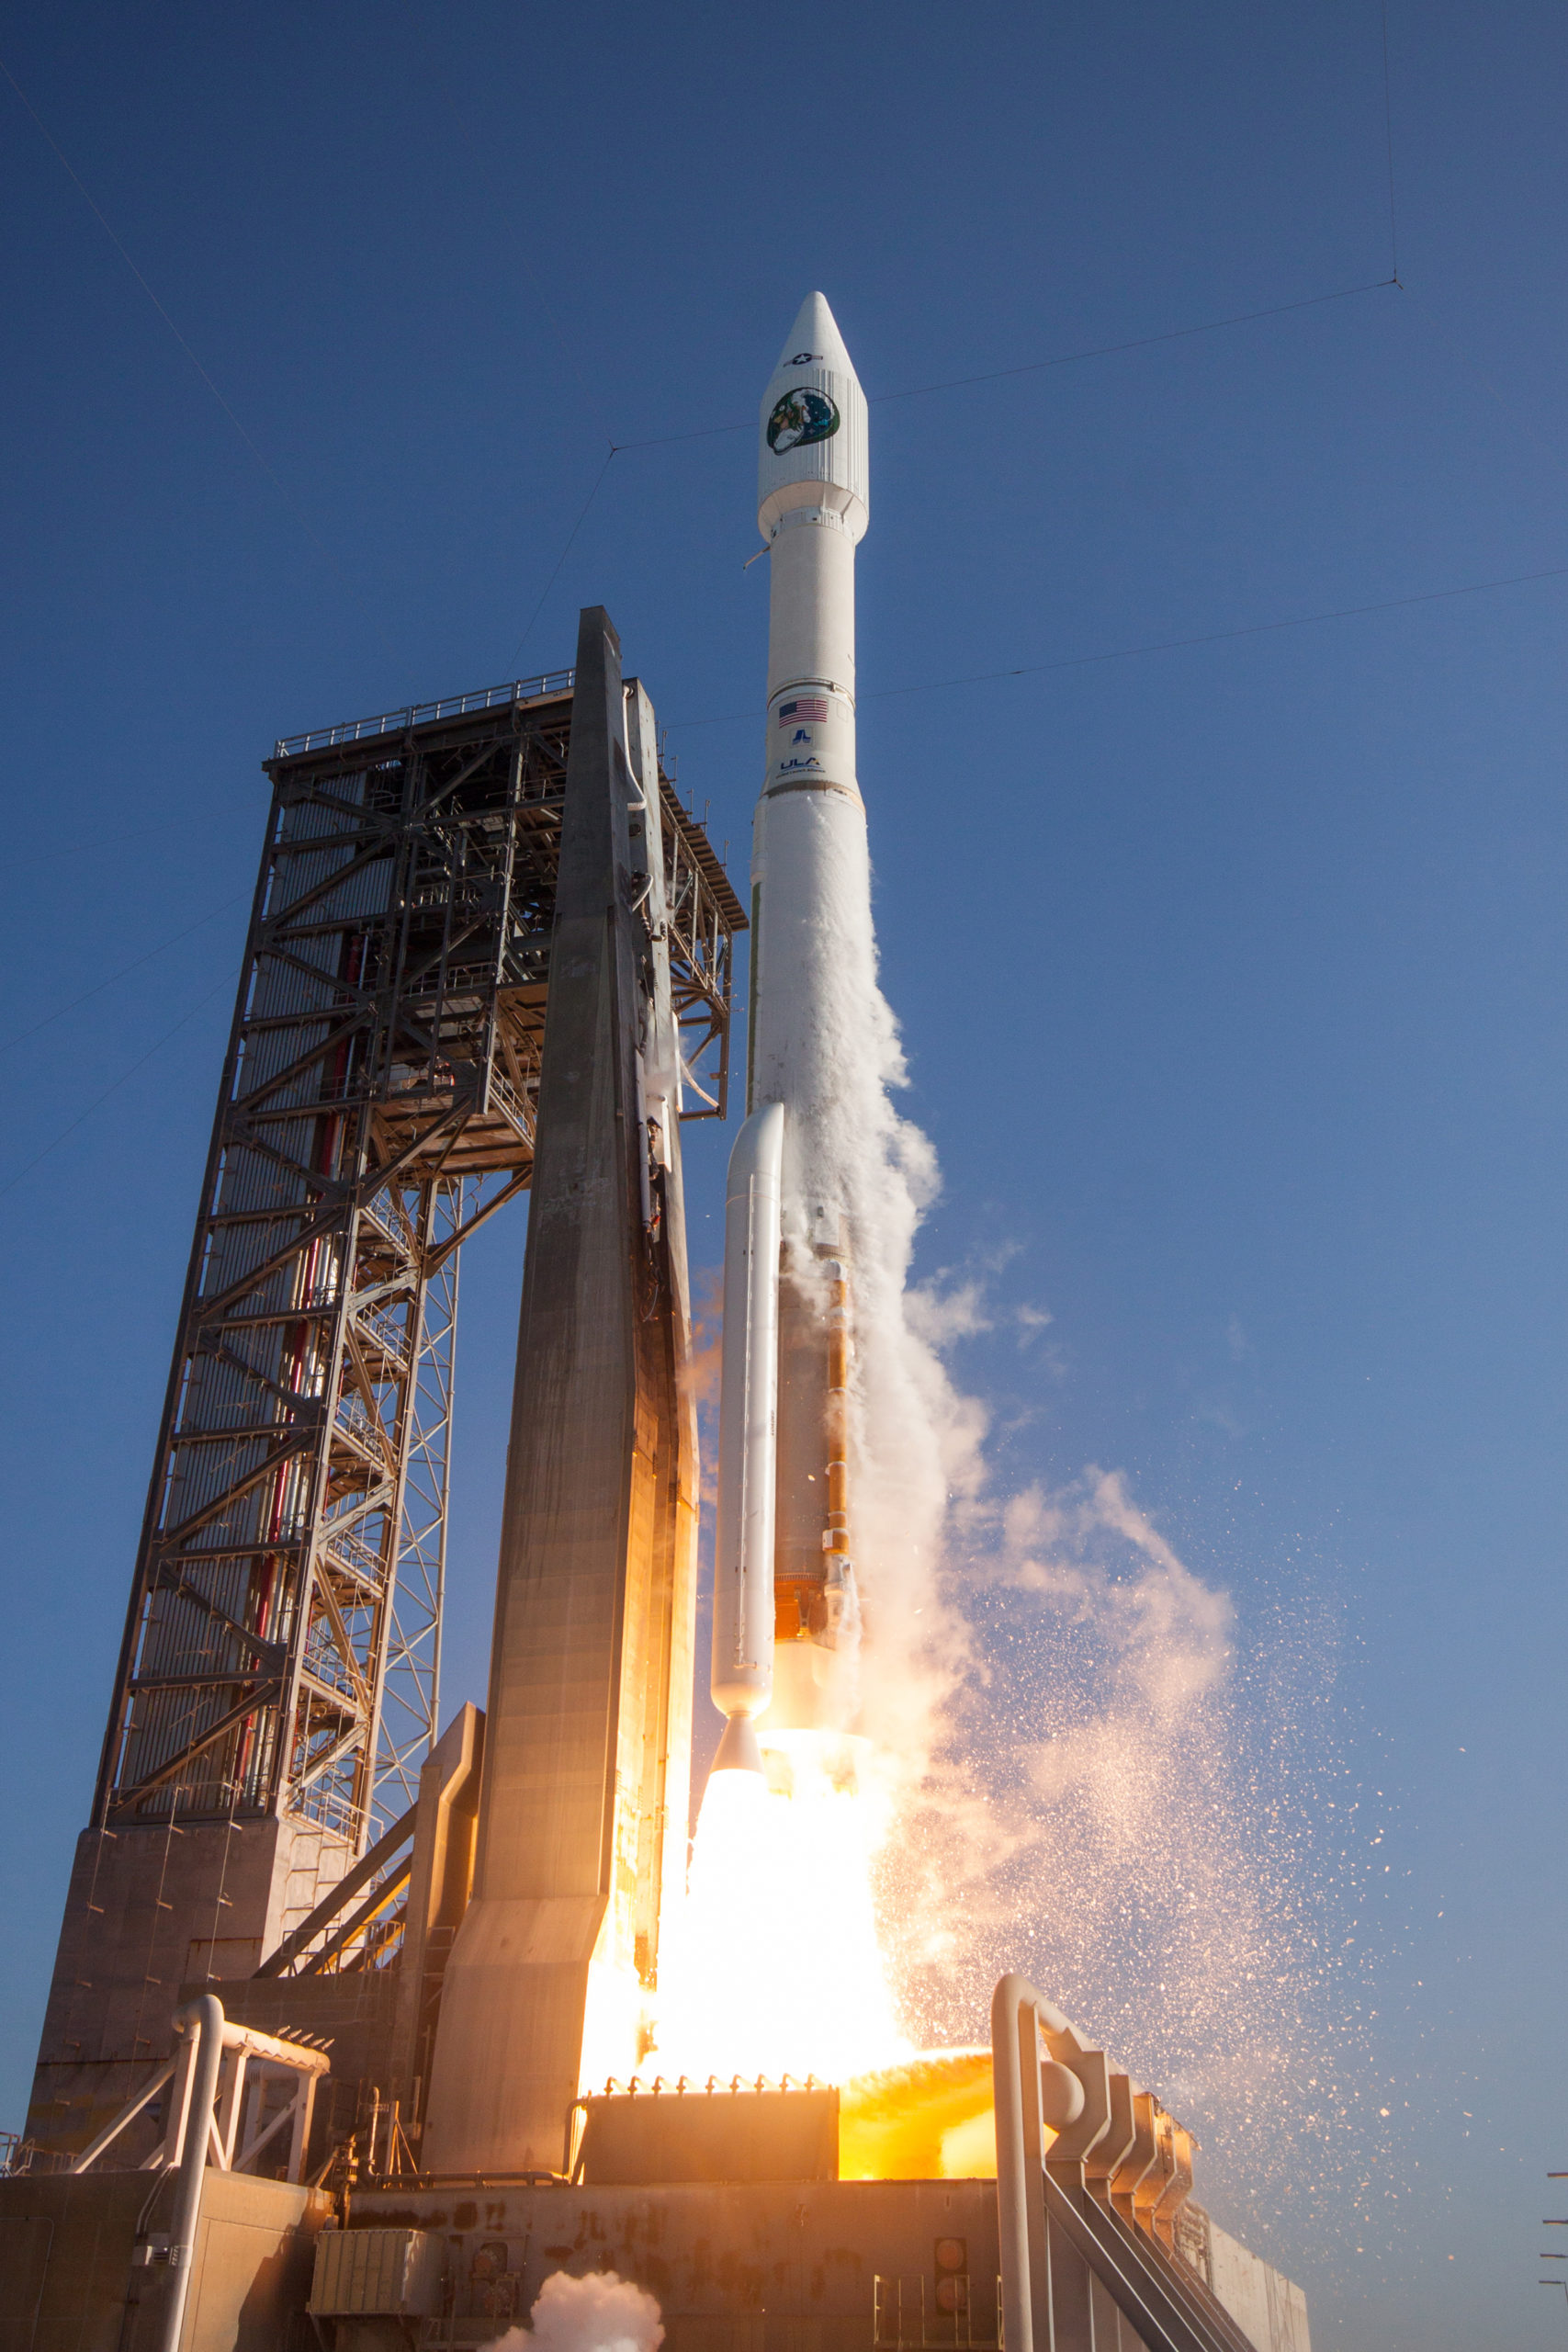 The World’s Fastest Rocket Just Launched A Secret Spy Satellite